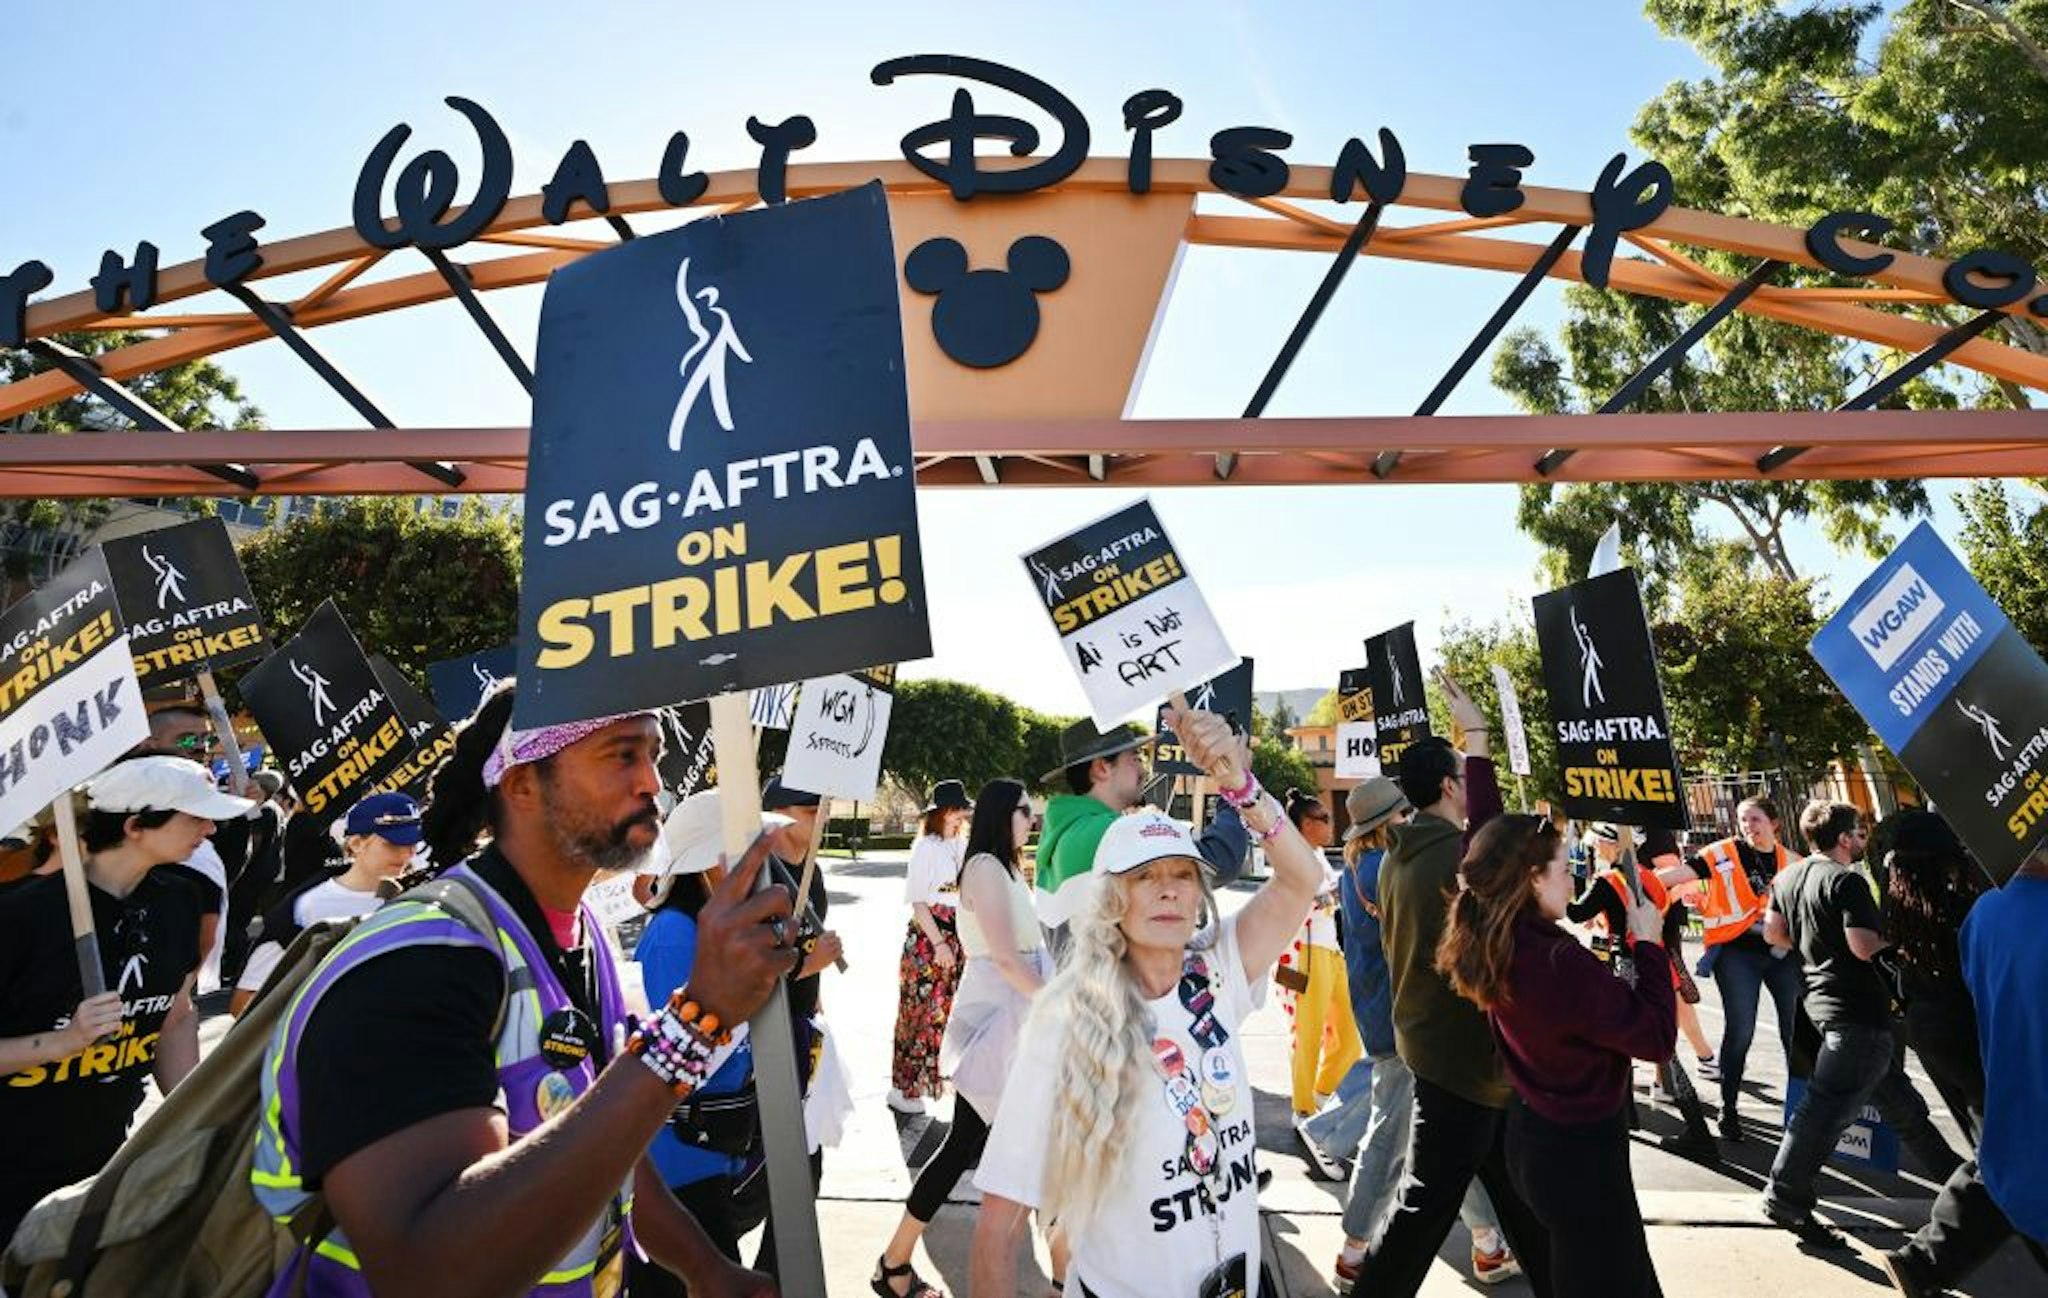 EDITORS NOTE: Graphic content / TOPSHOT - Actress Frances Fisher along SAG-AFTRA members and supporters pickets outside Disney Studios on day 111 of their strike against the Hollywood studios, in Burbank, California, on November 1, 2023. SAG-AFTRA members walked off film and TV sets in July, over terms including pay and the use of artificial intelligence. Talks have intensified in recent weeks, with the two sides meeting most days and expressing cautious optimism -- while also warning that they remain far apart on several key issues. (Photo by Frederic J. BROWN / AFP) (Photo by FREDERIC J. BROWN/AFP via Getty Images)